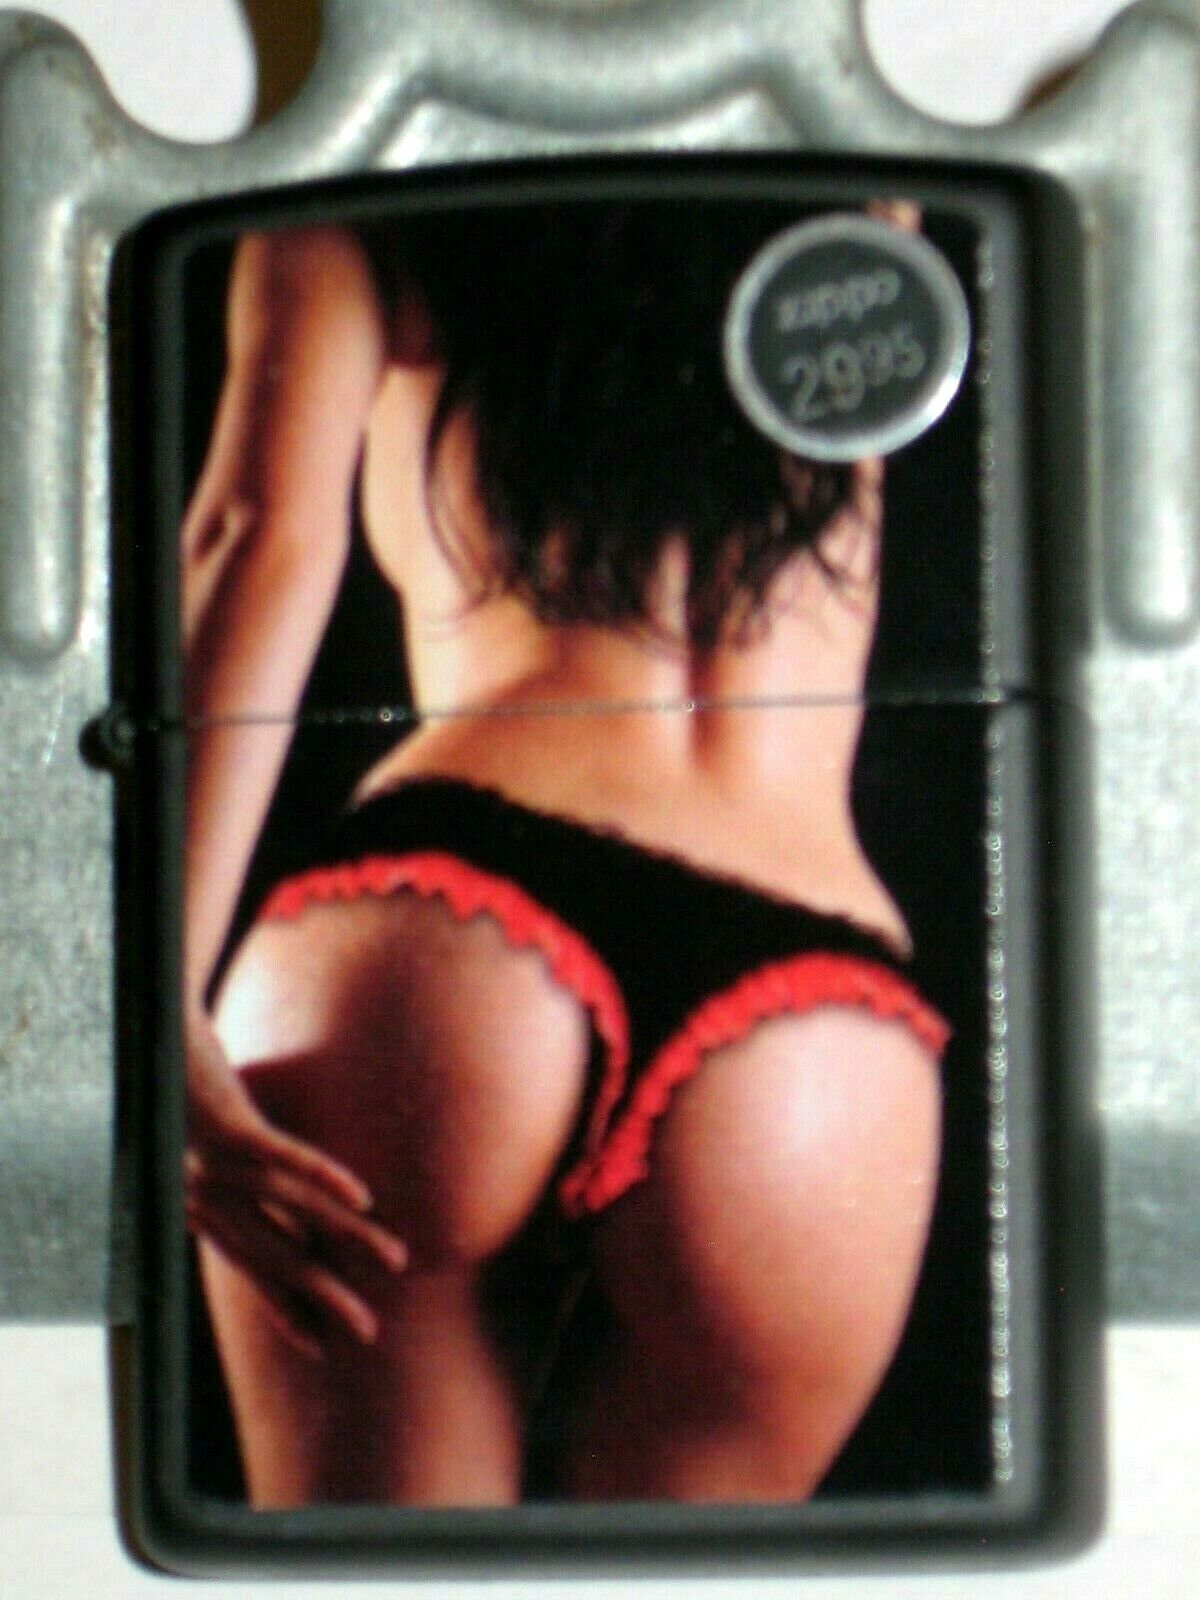 New Genuine USA ZIPPO Windproof Lighter 40845 Sexy Back View From Behind Blk Mat ZIPPO